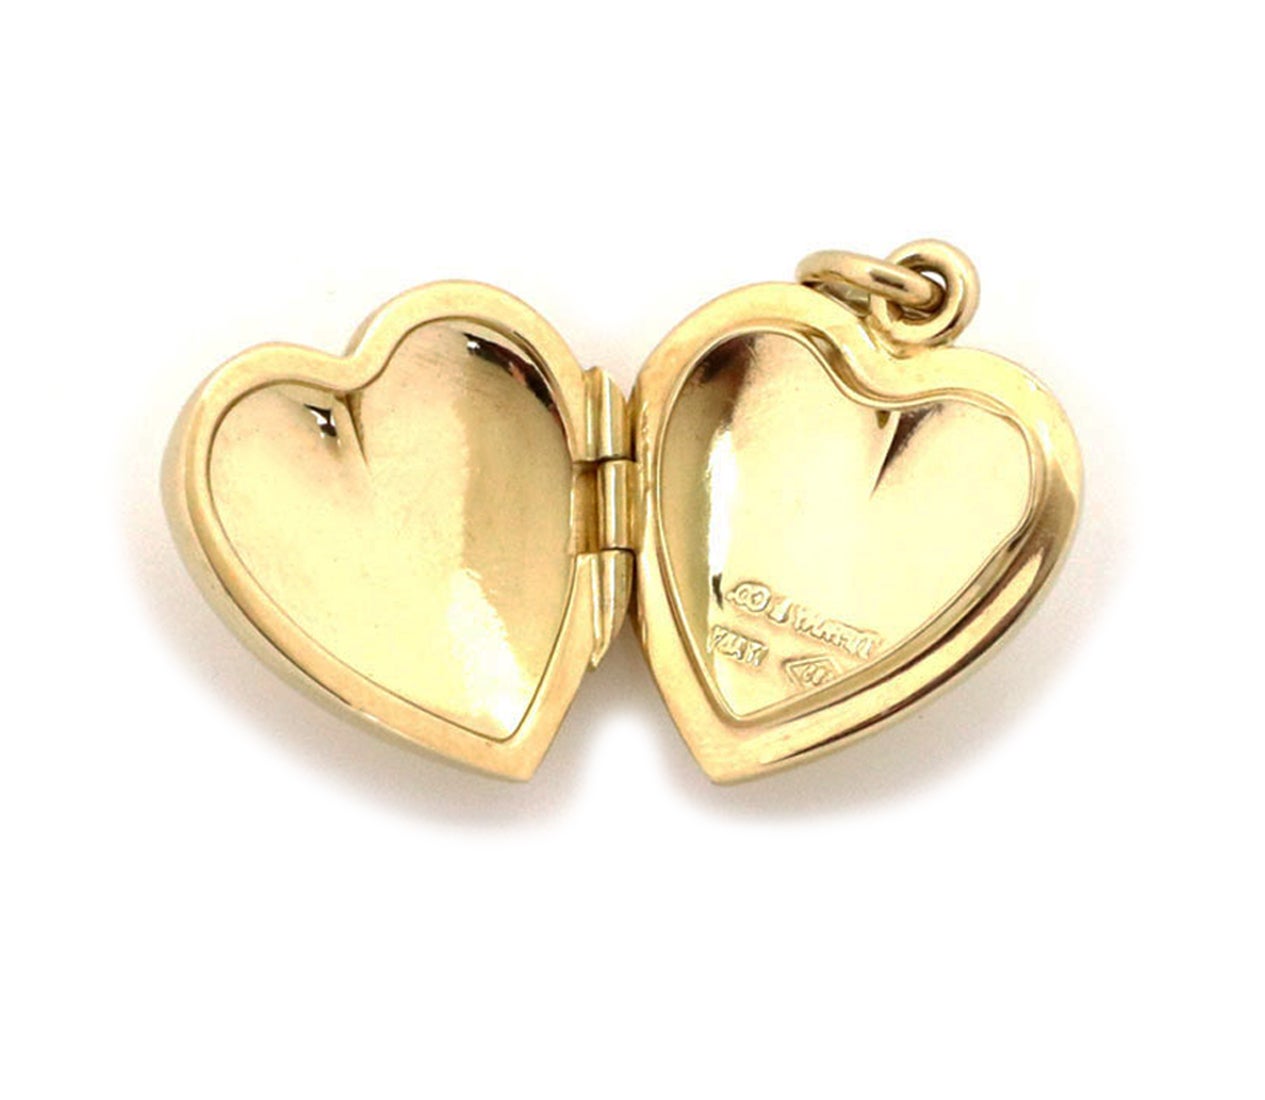 This lovely authentic vintage locket pendant is crafted from 14k yellow gold with a polished finish featuring a double side frame heart shape hinged pendant with opens and has a snap shut clasp. Comes with an oval bail and it is signed by the